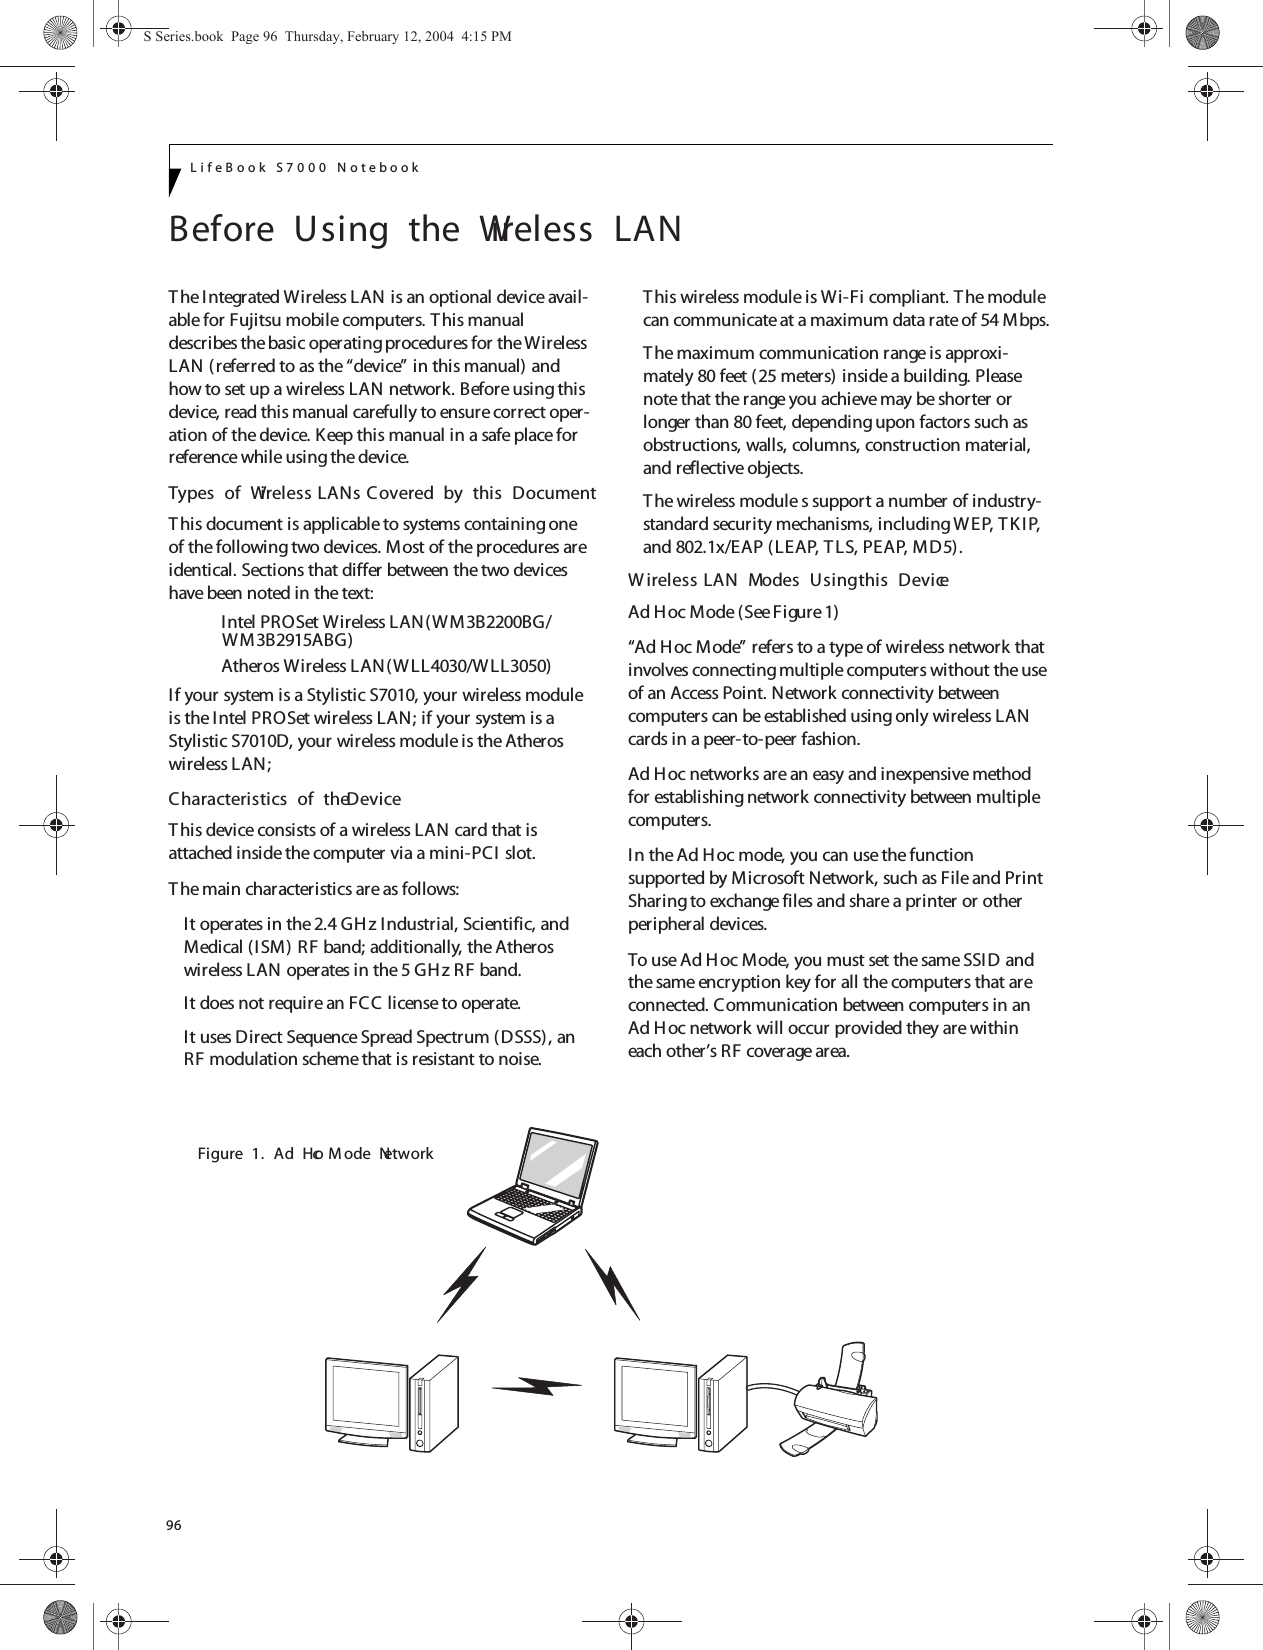 96LifeBook S7000 NotebookBefore  Using  the  Wireless  LANThe Integrated Wireless LAN is an optional device avail-able for Fujitsu mobile computers. T his manual describes the basic operating procedures for the Wireless LAN (referred to as the “device” in this manual) and how to set up a wireless LAN network. Before using this device, read this manual carefully to ensure correct oper-ation of the device. Keep this manual in a safe place for reference while using the device.Types  of  Wireless LANs Covered  by  this  DocumentThis document is applicable to systems containing one of the following two devices. Most of the procedures are identical. Sections that differ between the two devices have been noted in the text:Intel PROSet Wireless LAN(WM3B2200BG/Atheros Wireless LAN(WLL4030/WLL3050)If your system is a Stylistic S7010, your wireless module is the Intel PROSet wireless LAN; if your system is a Stylistic S7010D, your wireless module is the Atheros wireless LAN;  Characteristics  of  the DeviceThis device consists of a wireless LAN card that is attached inside the computer via a mini-PCI  slot.The main characteristics are as follows:It operates in the 2.4 GHz Industrial, Scientific, and Medical (ISM) RF band; additionally, the Atheros wireless LAN operates in the 5 GHz RF band.It does not require an FCC license to operate.It uses Direct Sequence Spread Spectrum (DSSS), an RF modulation scheme that is resistant to noise.This wireless module is Wi-Fi compliant. The module can communicate at a maximum data rate of 54 Mbps.The maximum communication range is approxi-mately 80 feet (25 meters) inside a building. Please note that the range you achieve may be shorter or longer than 80 feet, depending upon factors such as obstructions, walls, columns, construction material, and reflective objects.The wireless module s support a number of industry-standard security mechanisms, including WEP, TKIP, and 802.1x/EAP (LEAP, TLS, PEAP, MD5).W ireless LAN  Modes  Using this  DeviceAd H oc Mode (See Figure 1)“Ad Hoc Mode” refers to a type of wireless network that involves connecting multiple computers without the use of an Access Point. Network connectivity between computers can be established using only wireless LAN cards in a peer-to-peer fashion.Ad Hoc networks are an easy and inexpensive method for establishing network connectivity between multiple computers.In the Ad Hoc mode, you can use the function supported by Microsoft Network, such as File and Print Sharing to exchange files and share a printer or other peripheral devices.To use Ad Hoc Mode, you must set the same SSID and the same encryption key for all the computers that are connected. Communication between computers in an Ad Hoc network will occur provided they are within each other’s RF coverage area. Figure  1.  Ad  Hoc  M ode  NetworkS Series.book  Page 96  Thursday, February 12, 2004  4:15 PMWM3B2915ABG)